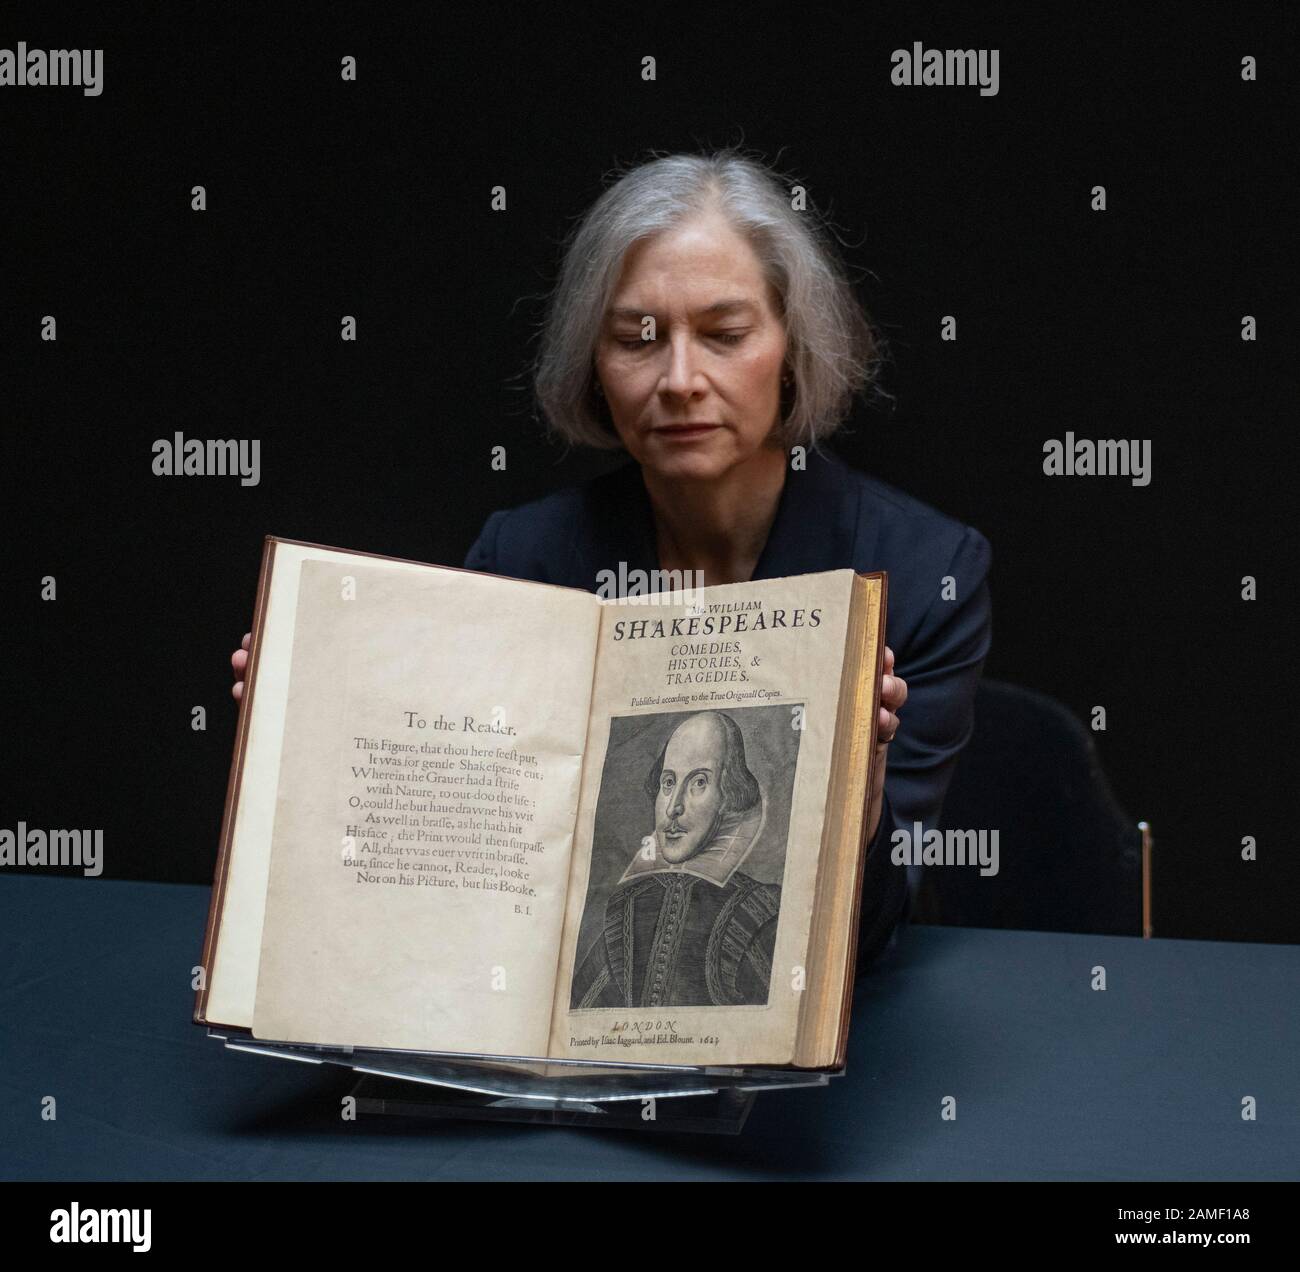 Christie’s, London, UK. 13th January 2020. Christie’s London unveil a rare complete copy of William Shakespeare’s First Folio, 'Comedies, Histories, & Tragedies', a complete copy of the greatest work of the English language and of world literature published in 1623. Estimated at US$4,000,000-6,000,000, the First Folio will be auctioned at Christie’s in New York on 24 April 2020. Credit: Malcolm Park/Alamy Live News. Stock Photo